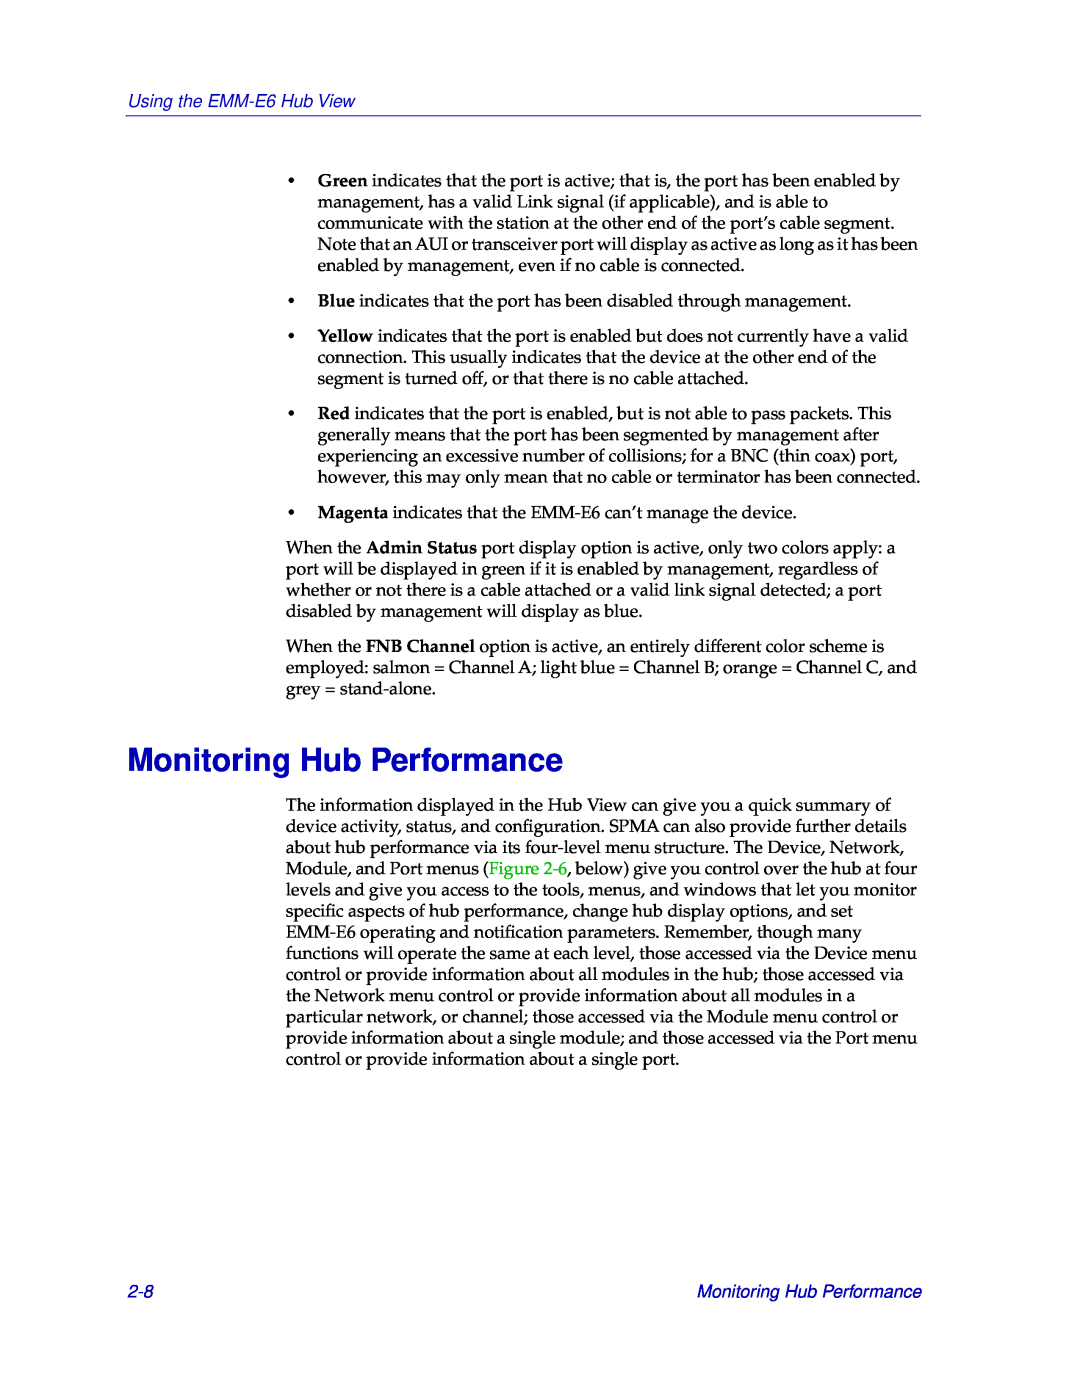 Cabletron Systems manual Monitoring Hub Performance, Using the EMM-E6 Hub View 